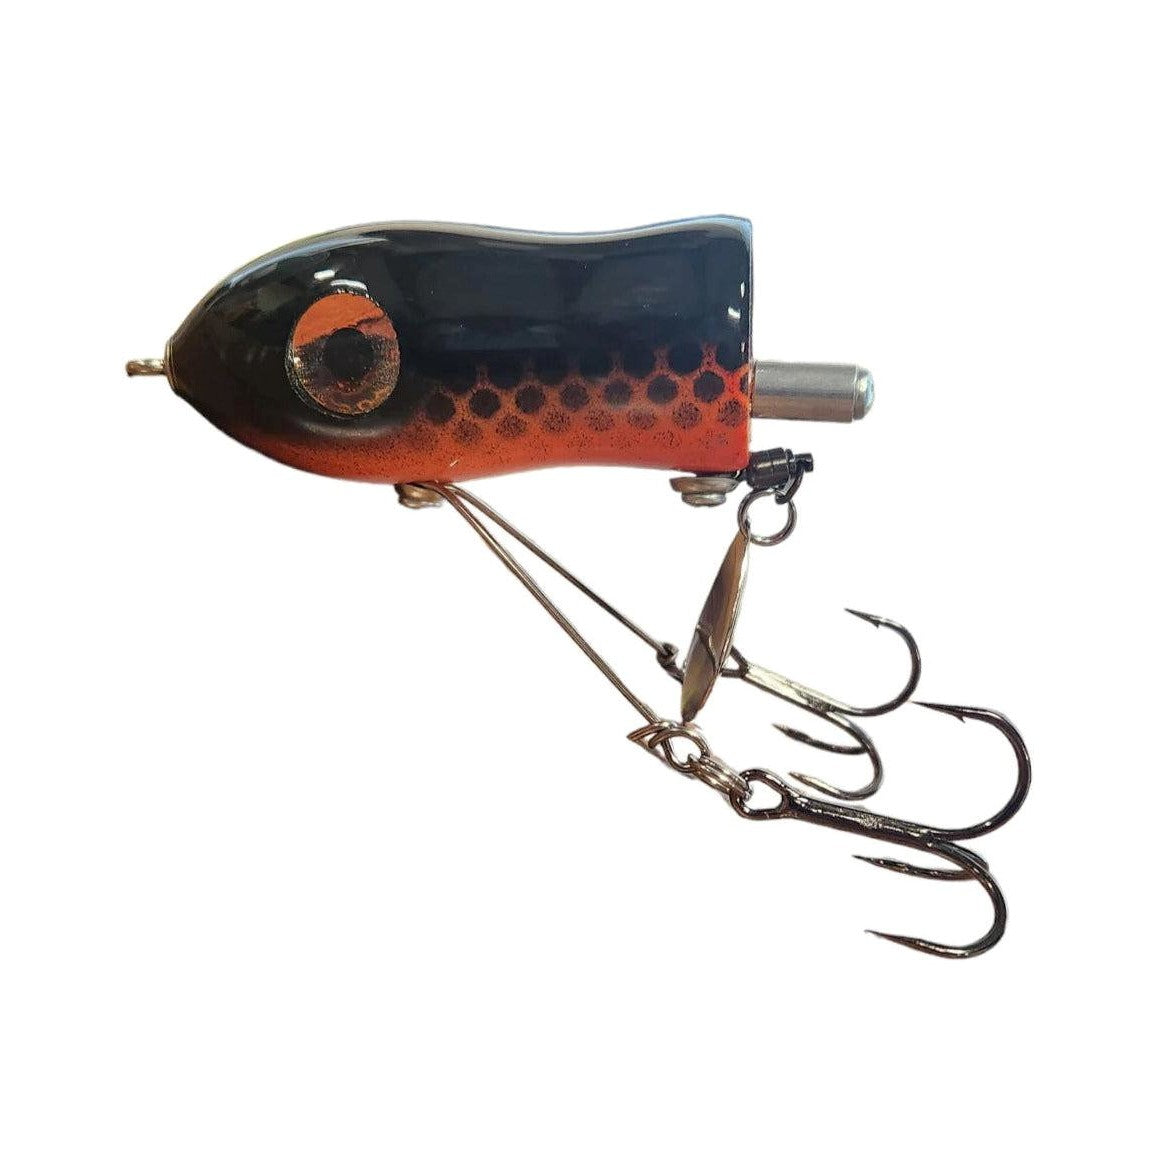 View of Topwater Chaos Tackle Little Flaptail Black/Orange available at EZOKO Pike and Musky Shop